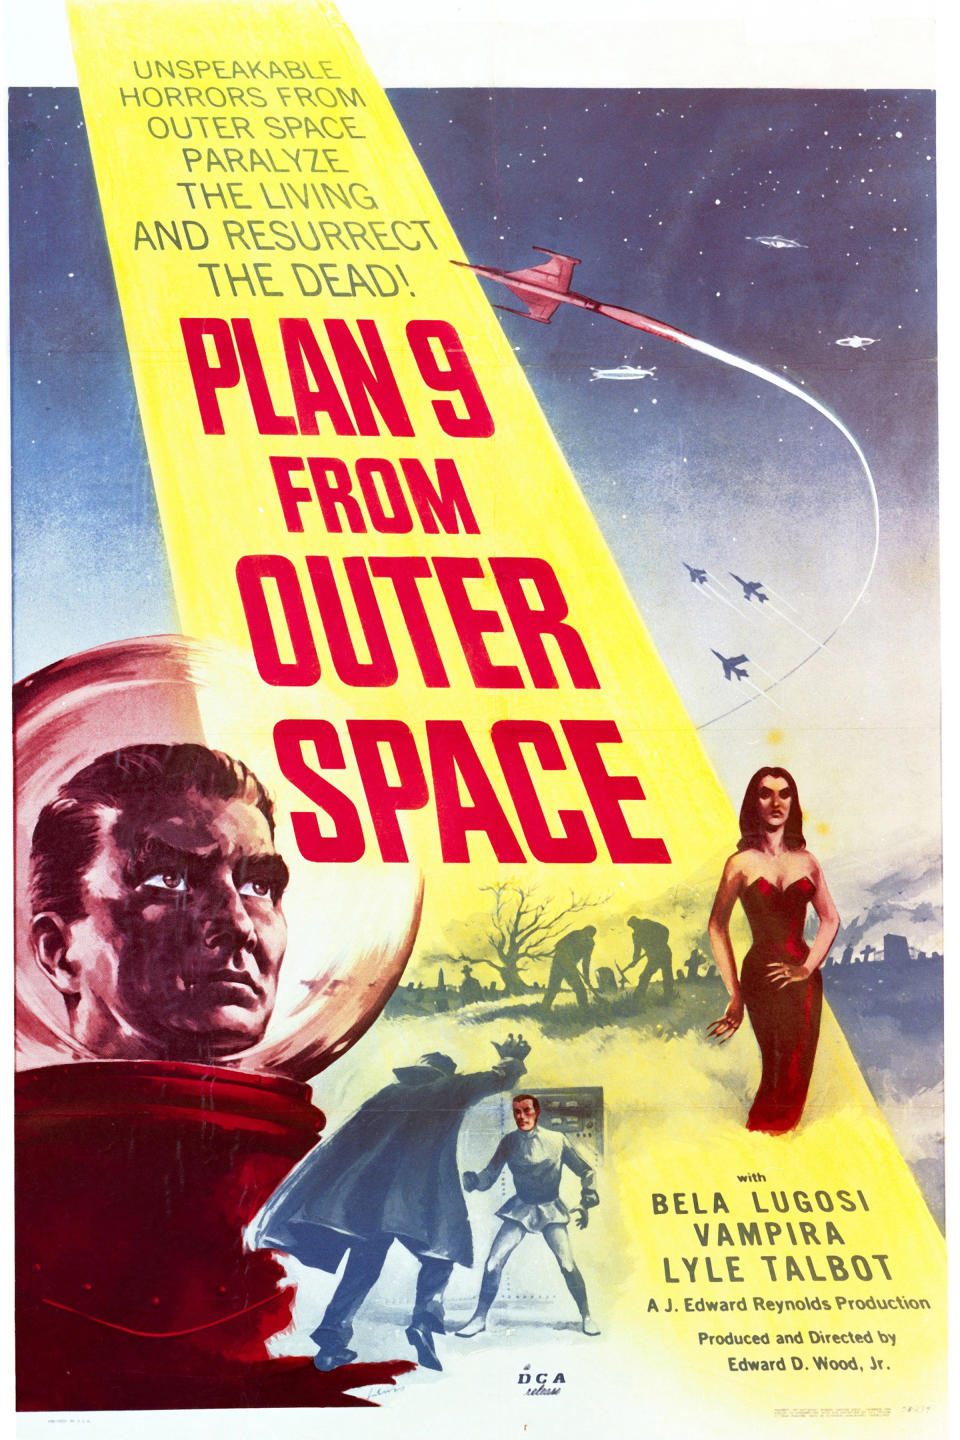 A poster for Edward D. Wood, Jr.'s 1959 science fiction film 'Plan 9 From Outer Space'. The film starred Gregory Walcott, Mona McKinnon, Tor Johnson, Bela Lugosi and Vampira. (Photo by Silver Screen Collection/Getty Images)